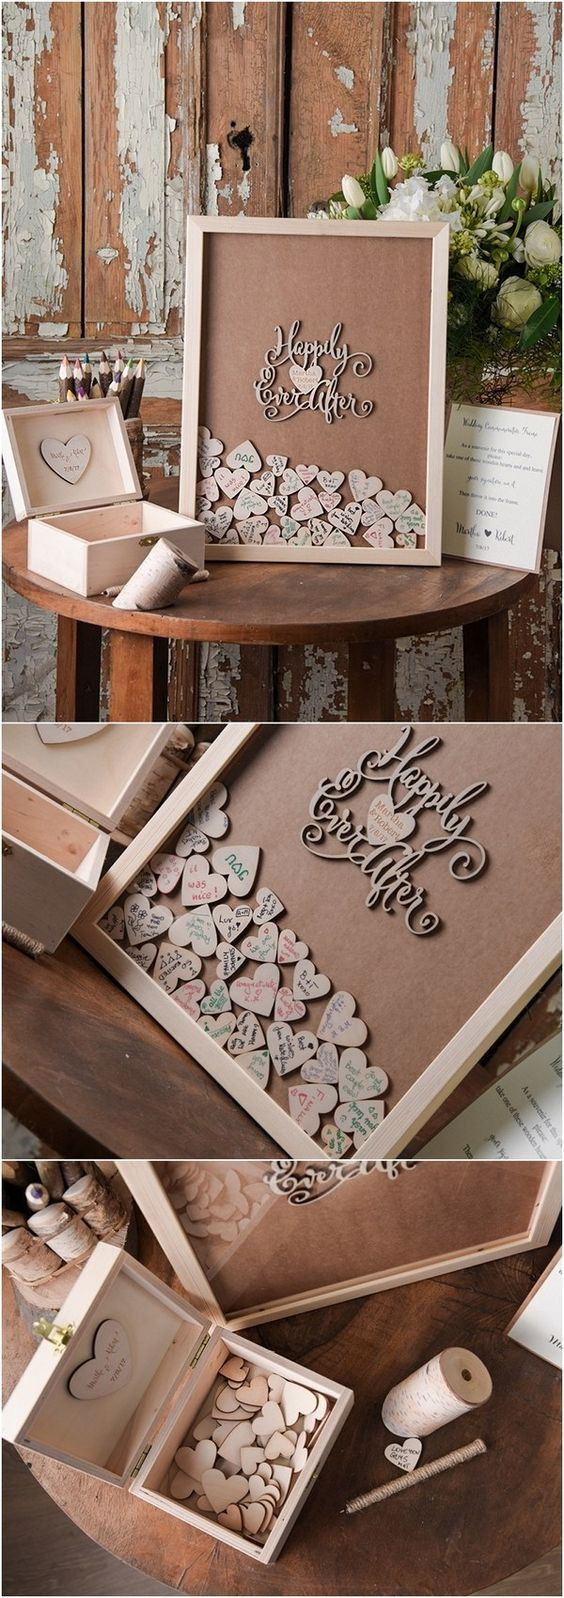 Wedding Stationery Guest Book
 22 of Our Favorite Unique Wedding Guest Book Ideas Page 2